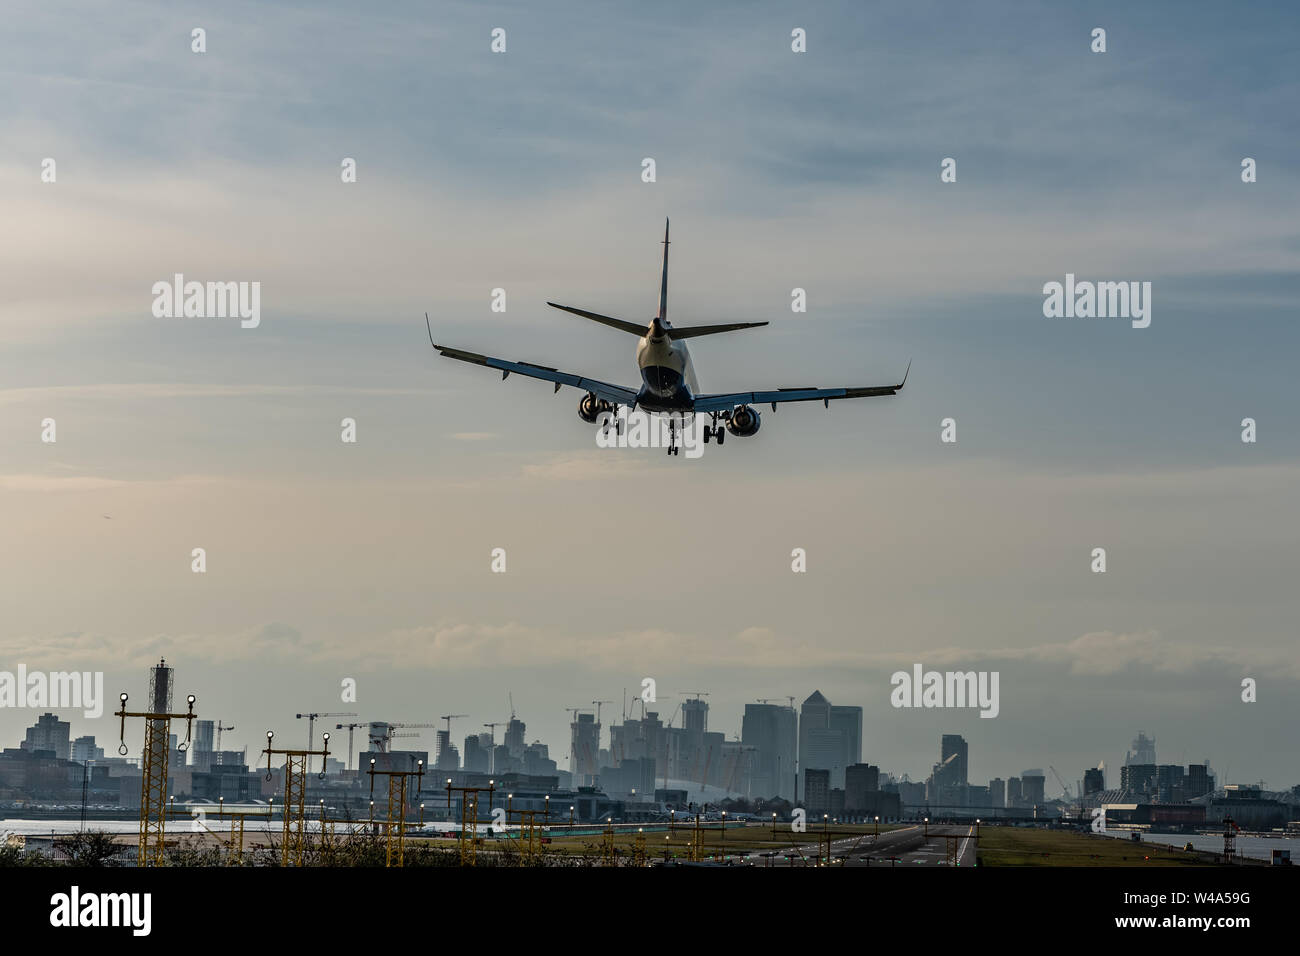 London, UK - 17, February 2019: BA CityFlyer a wholly owned subsidiary airline of British Airways based in Manchester England, aircraft type Embraer E Stock Photo